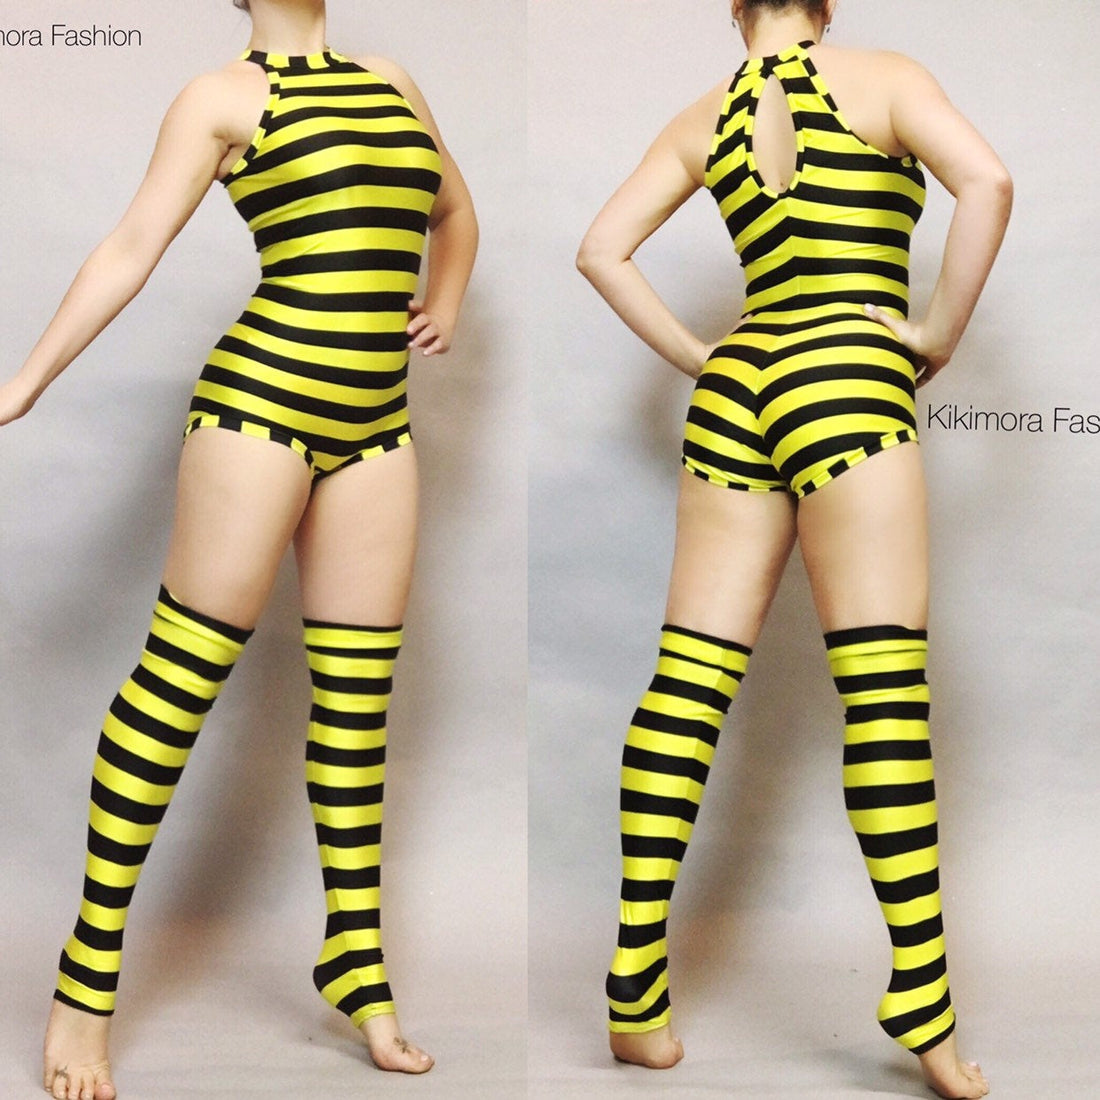 Gymnastic Leotard, Exotic Dancewear, Aerialist Gifts, Festival Outfit, Bee Costume, Made by Measure